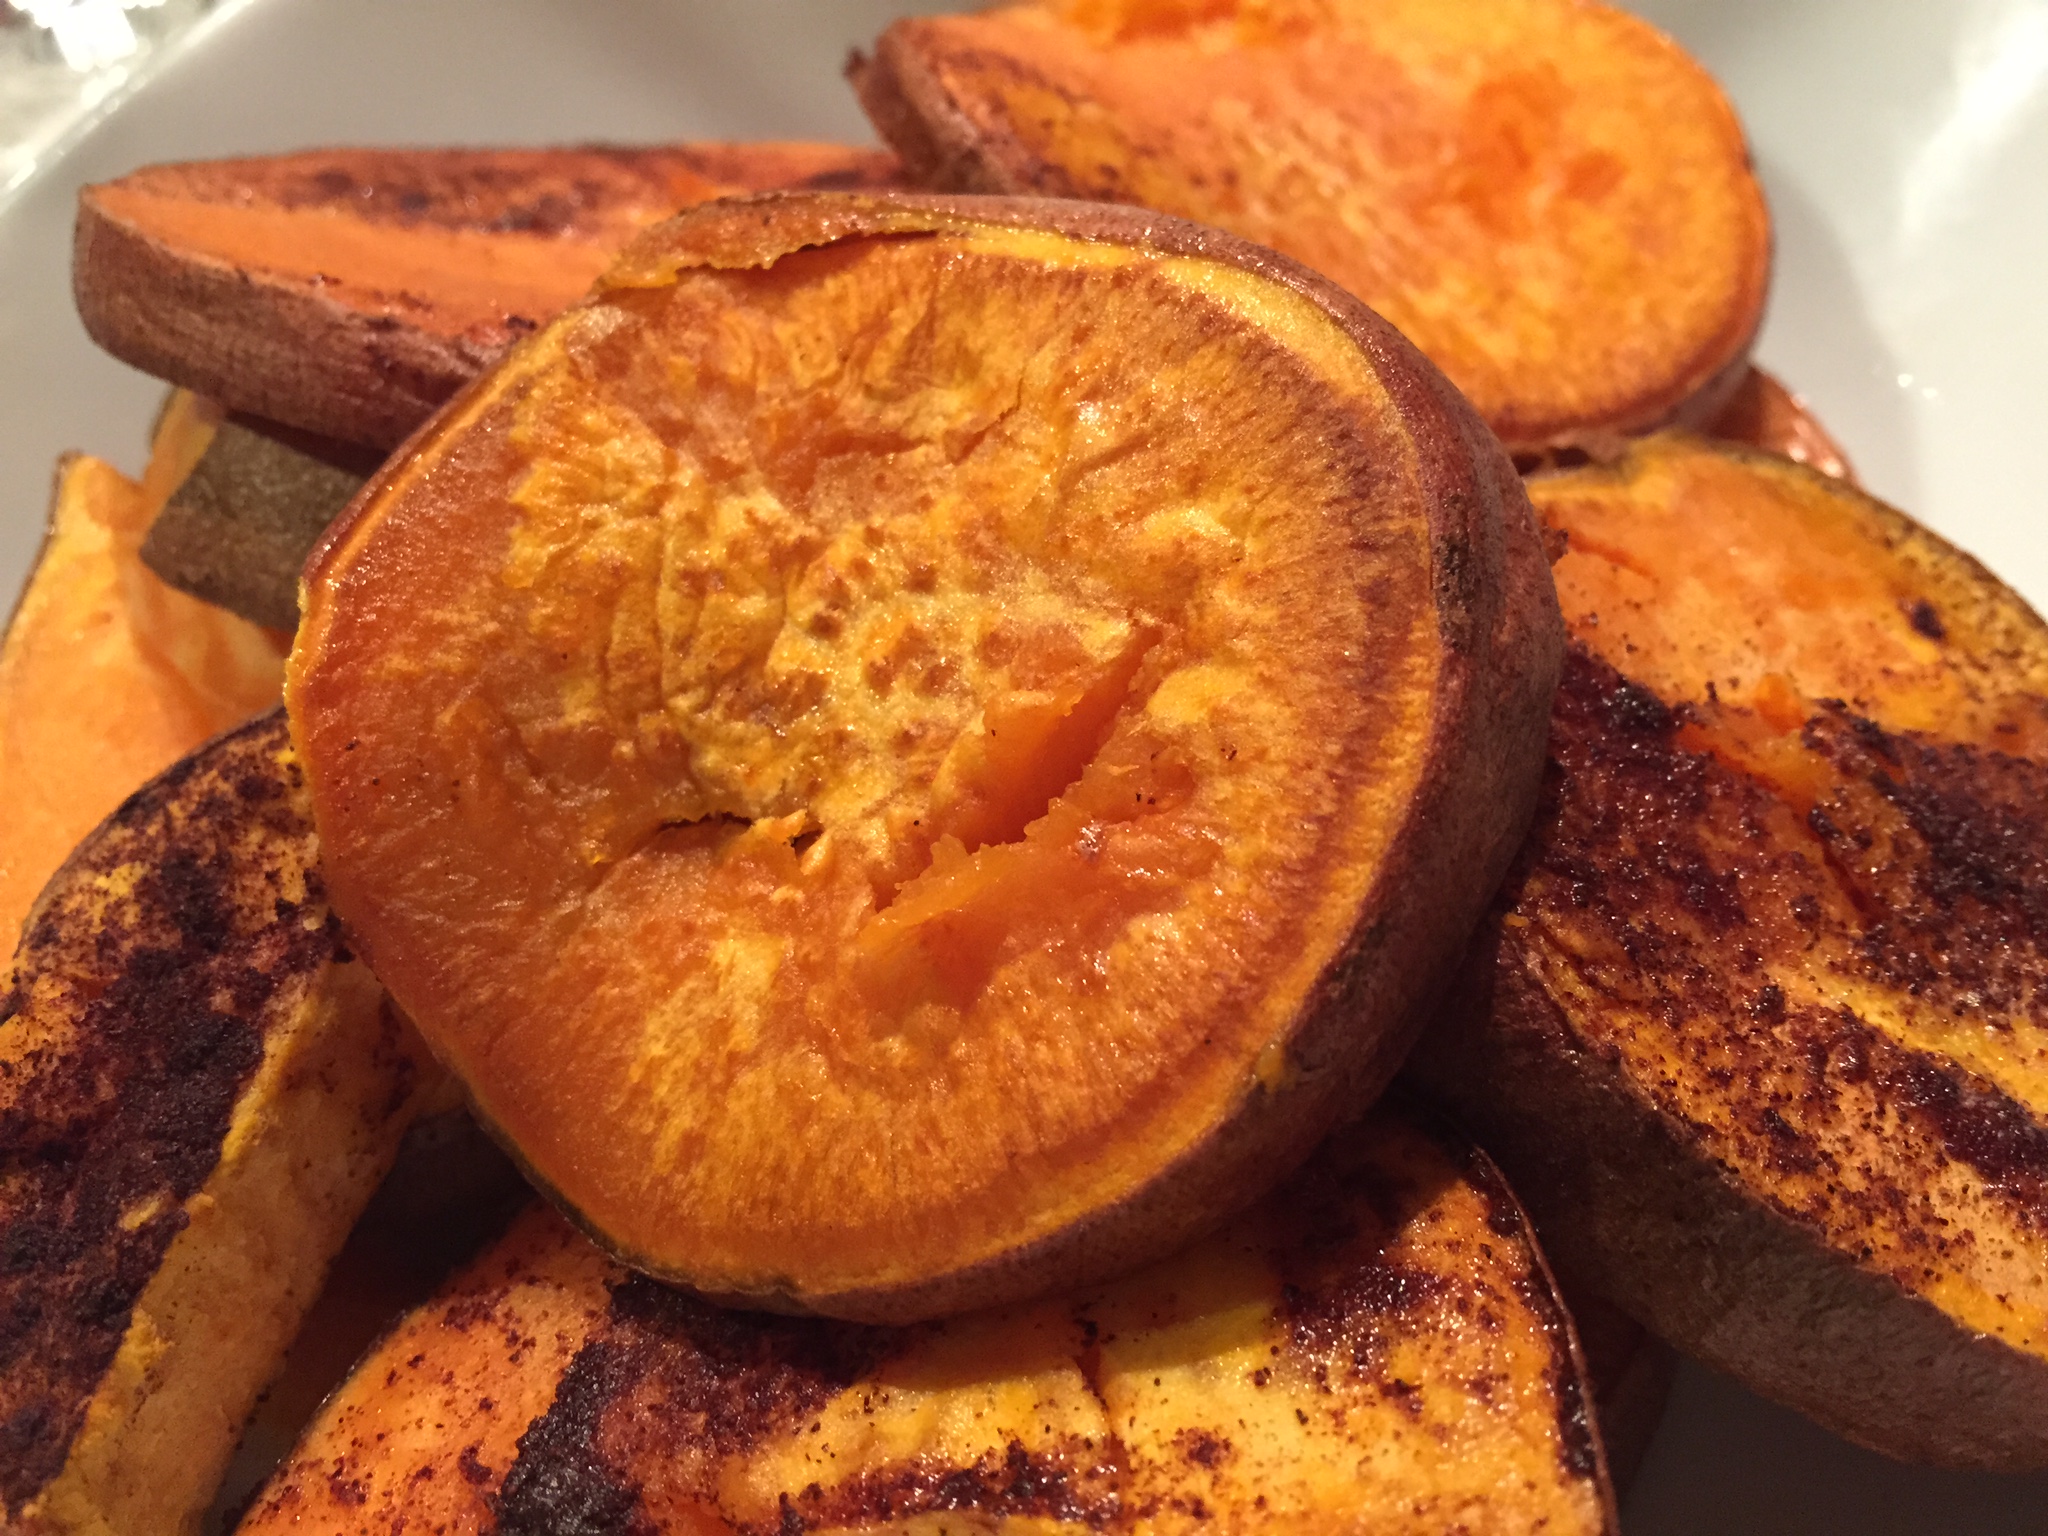 Simple, Healthy, Delicious – Sweet Potatoes